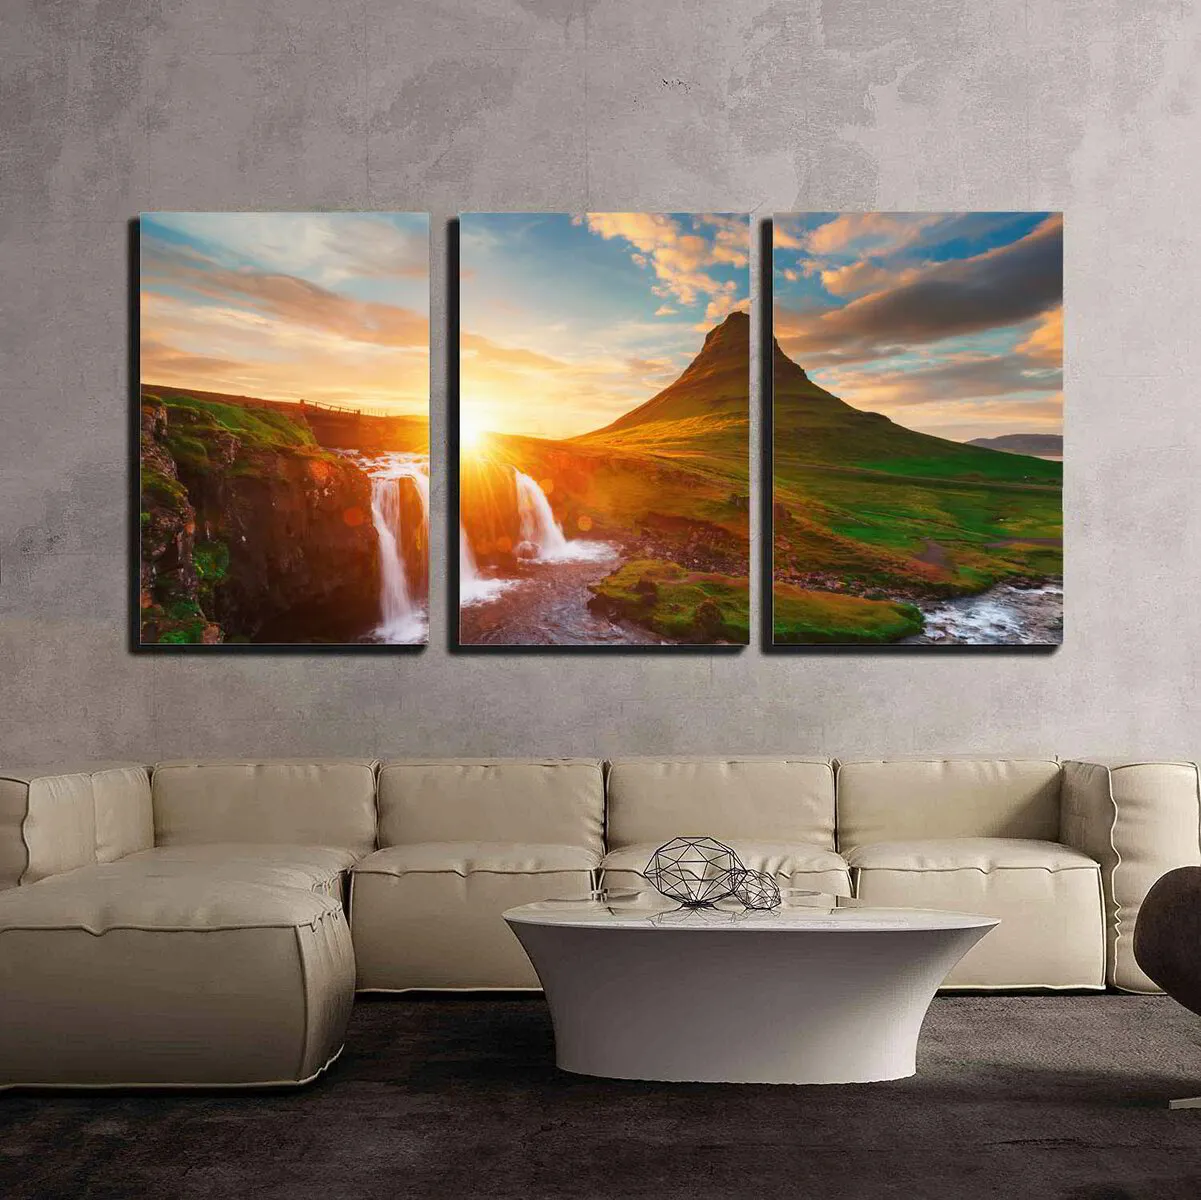 S3 Printed Acoustic Panels - Sunrise Over a Waterfall - 3 Panels